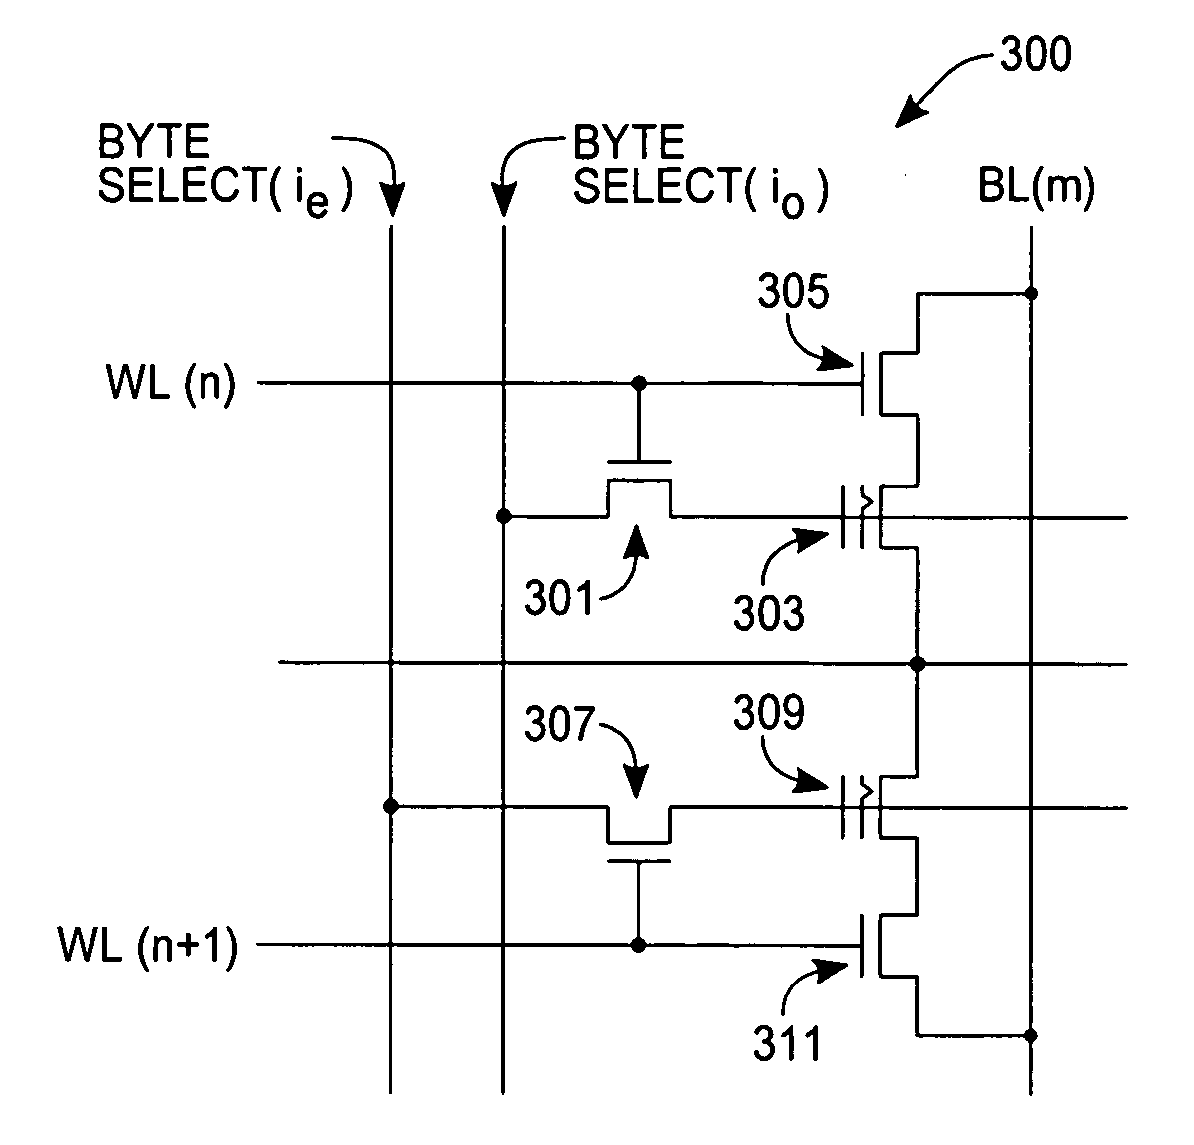 Double byte select high voltage line for EEPROM memory block